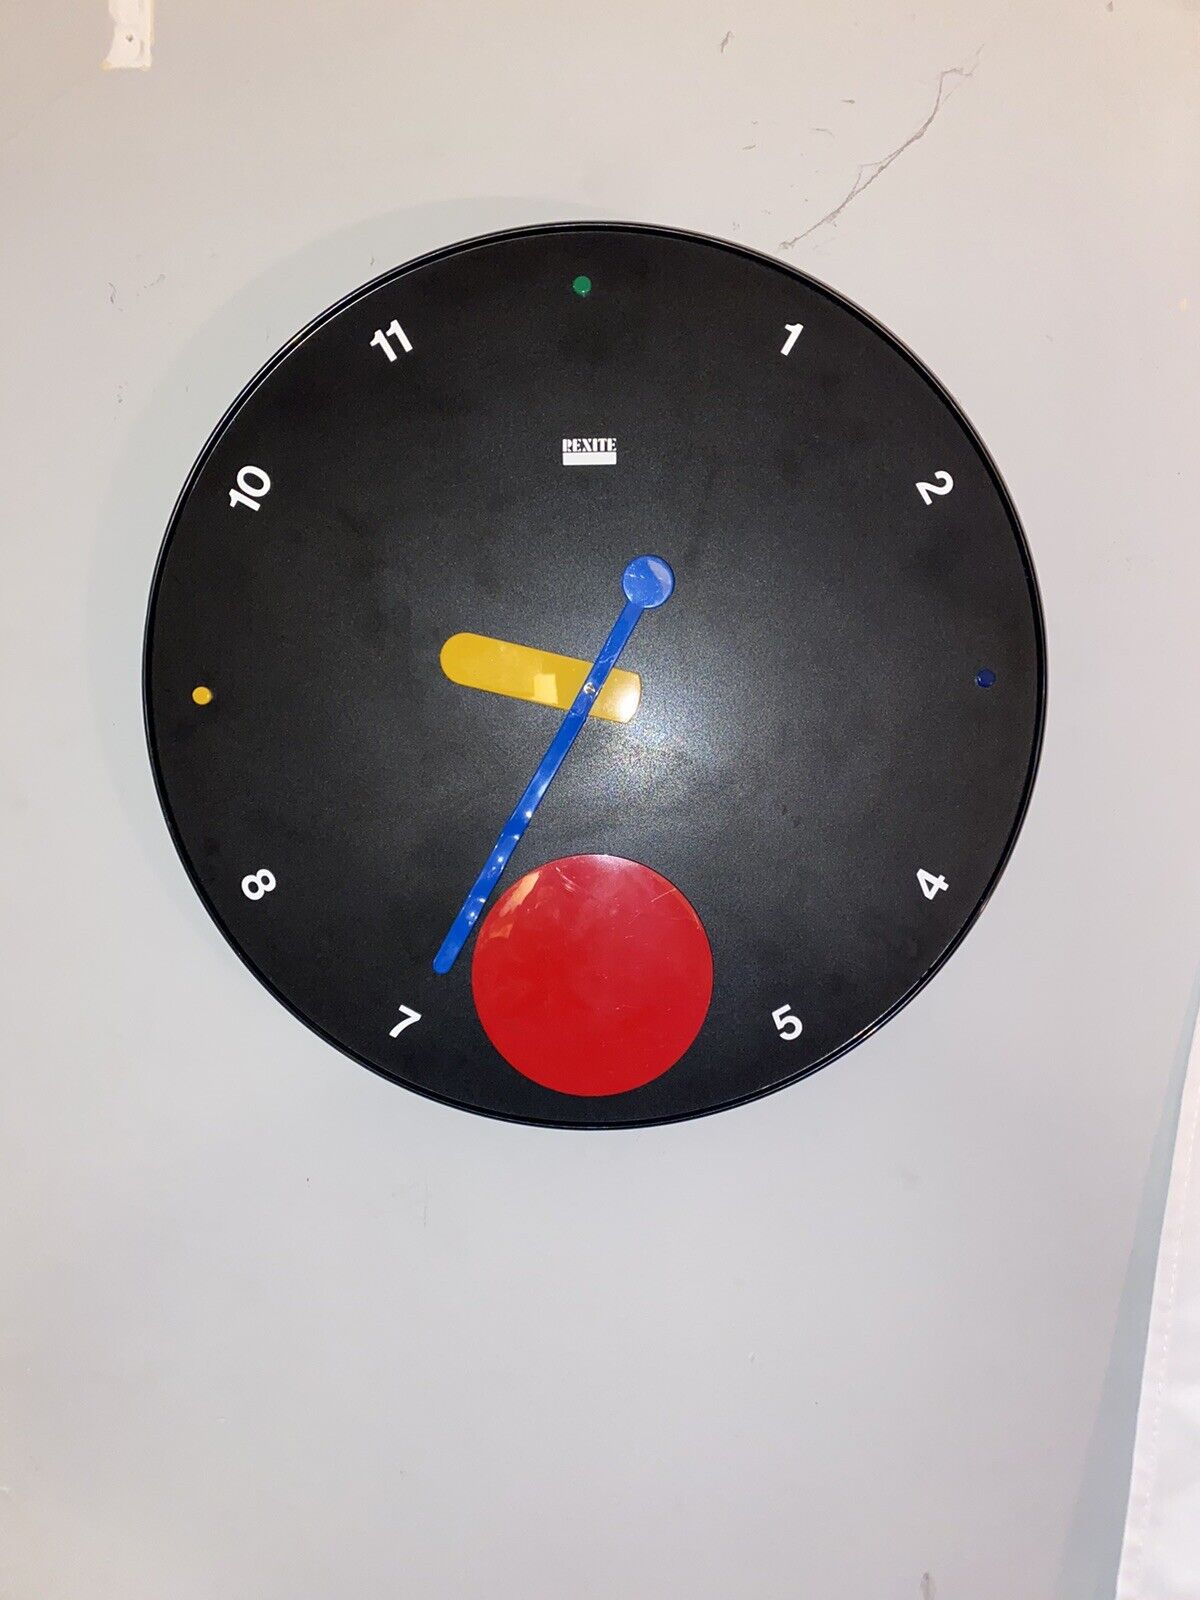 REXITE 987 Vintage Wall Clock  Contrattempo Retro Junghans 1980’s Italy WORKING